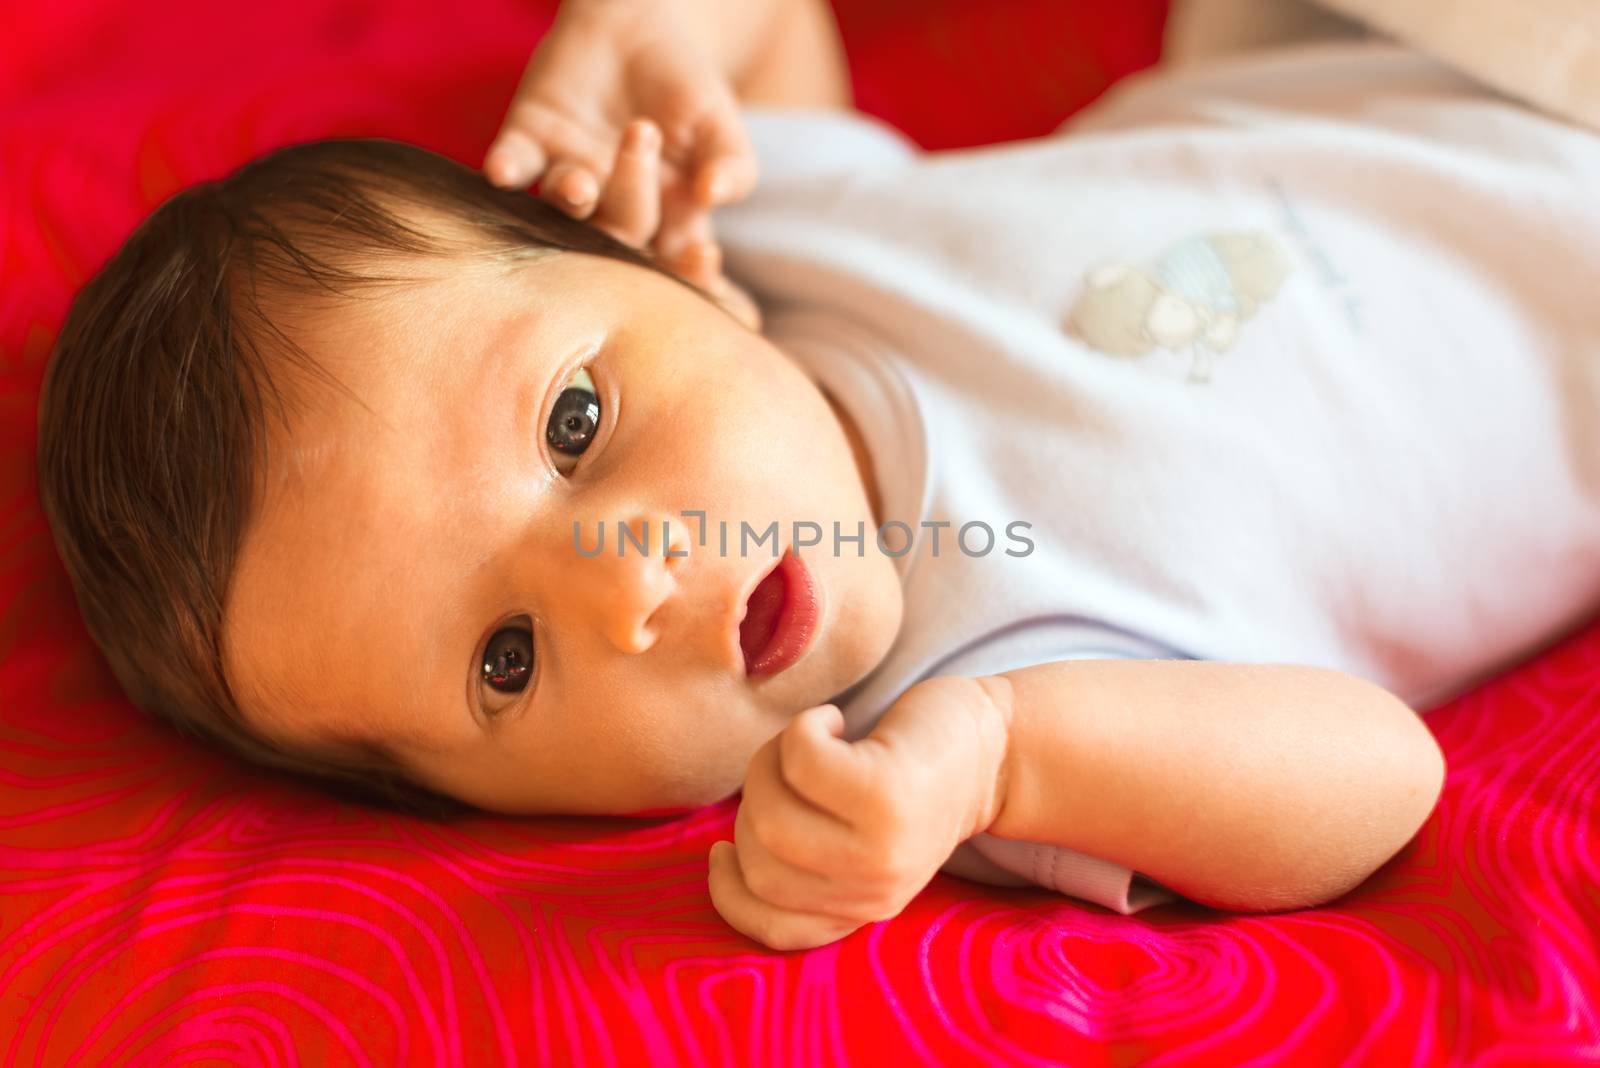 Newborn boy looks surprised with his mouth open on a red background.